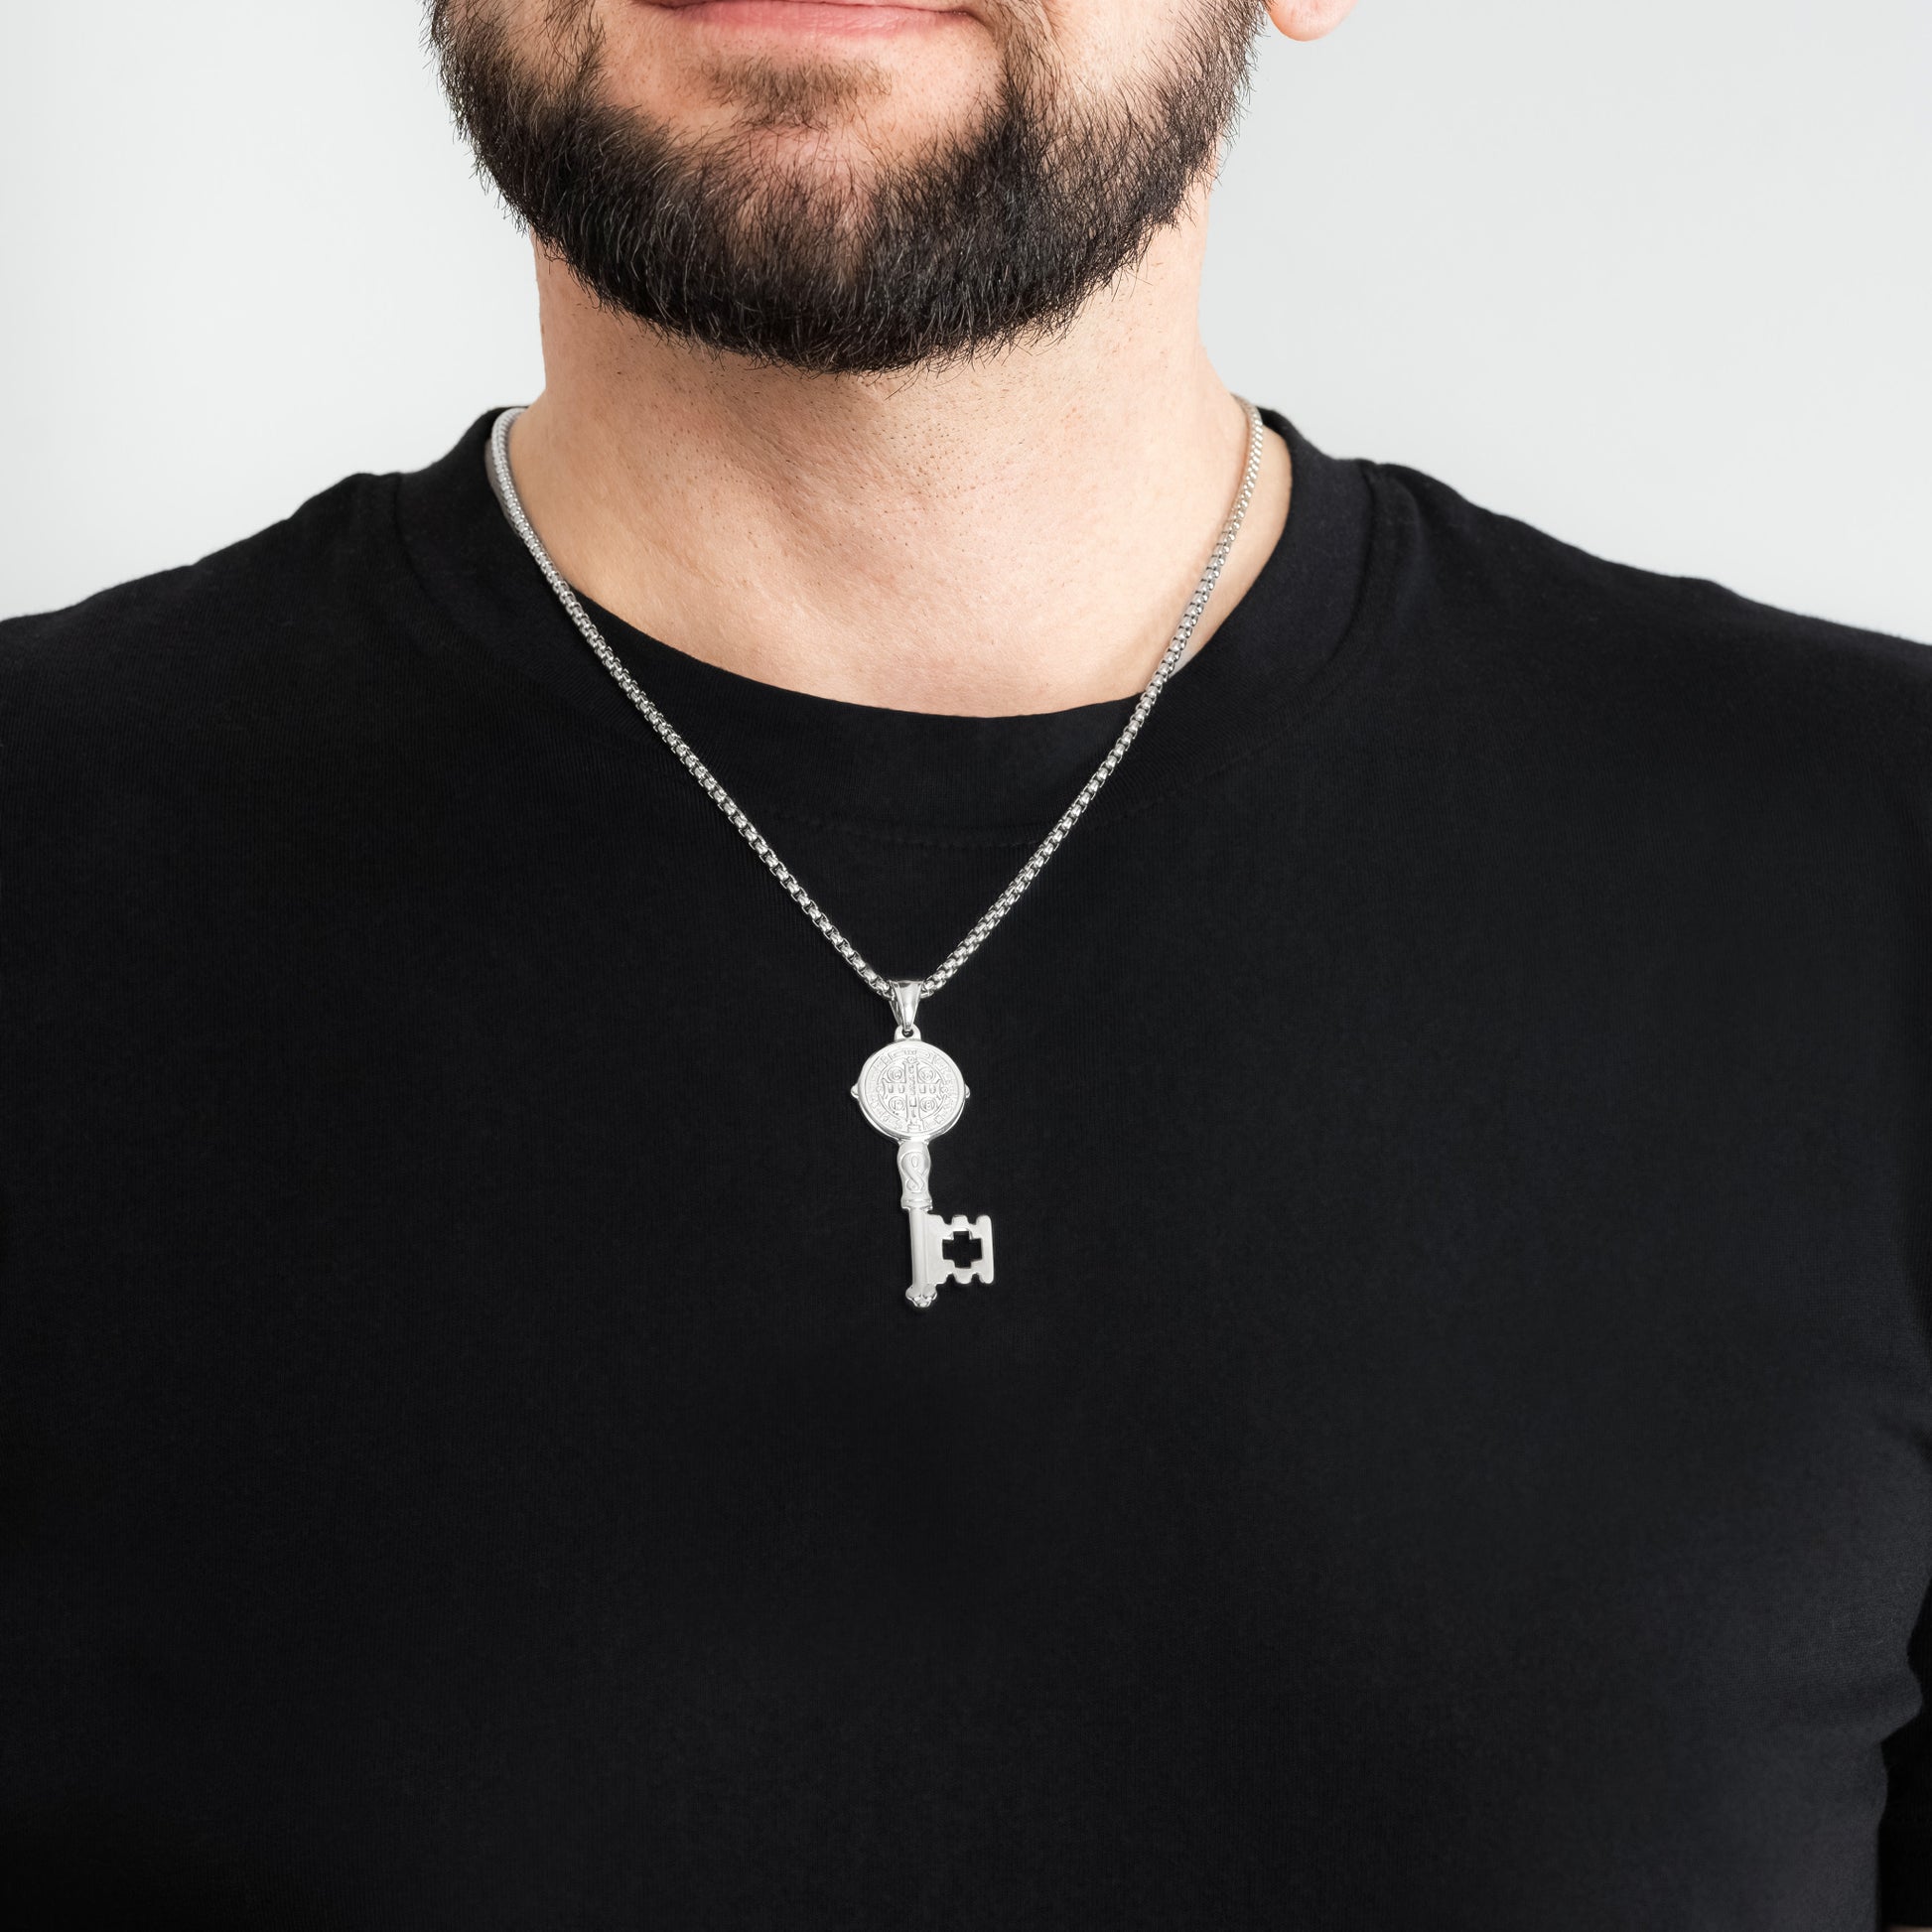 A male model in a black t-shirt wearing a St. Benedict Key Silver Pendant with a 3mm Silver Round Box link chain 22 inches.